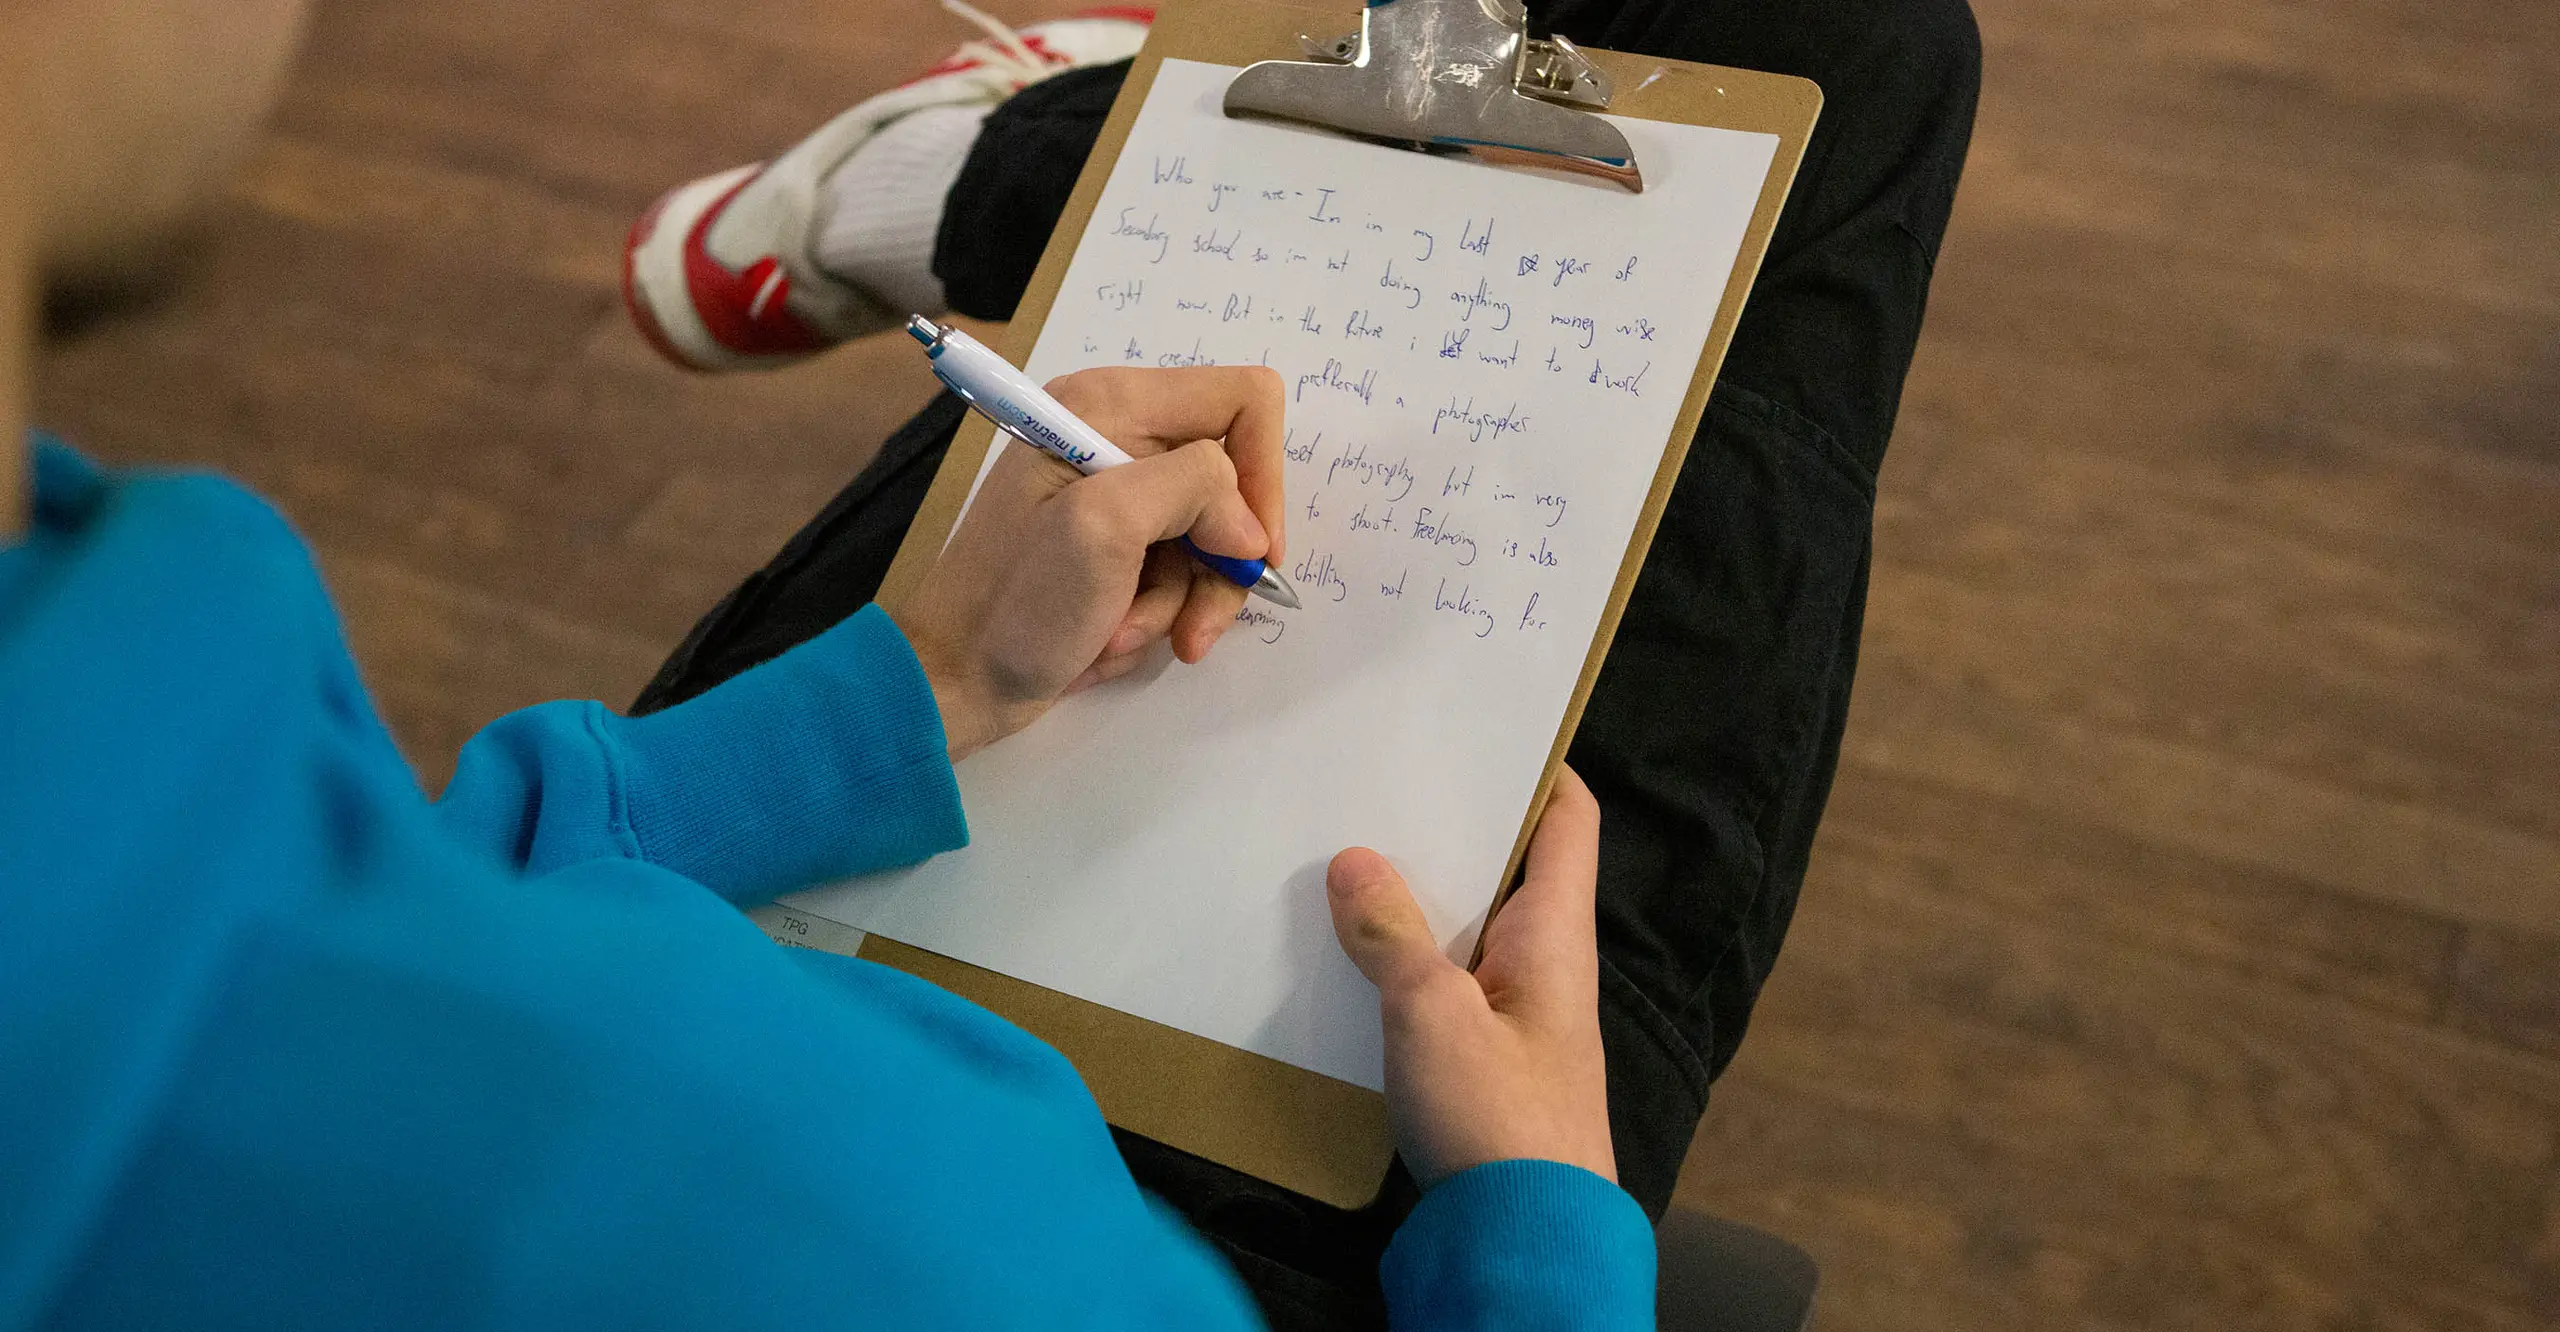 A photograph of someone sat down writing on a piece of white paper.